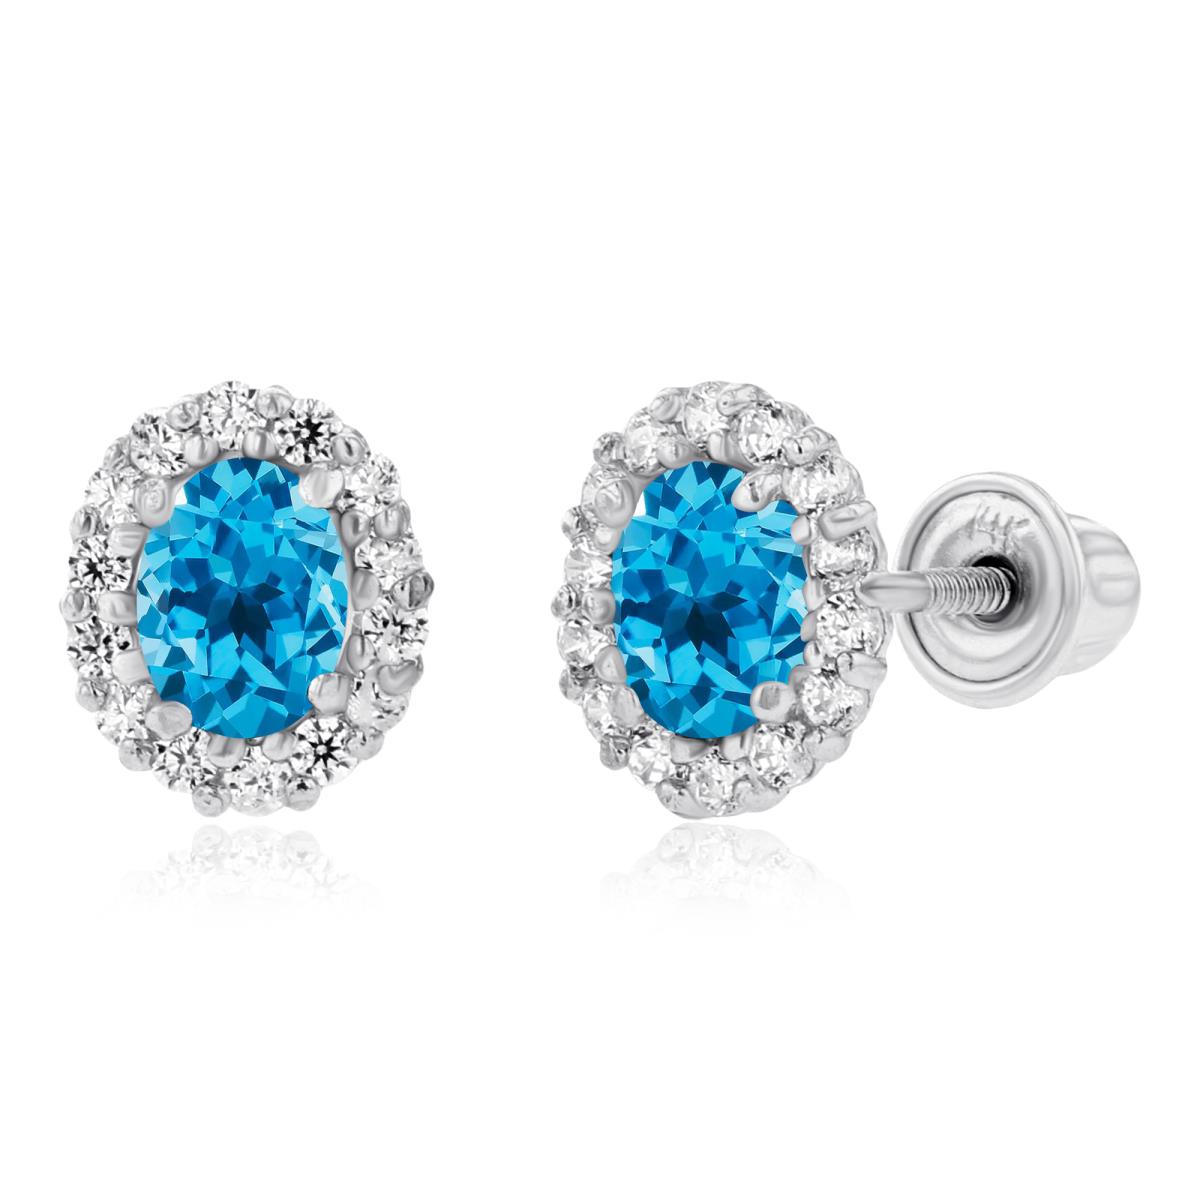 14K White Gold 4x3mm Oval Swiss Blue Topaz & 1mm Round Created White Sapphire Halo Screwback Earrings